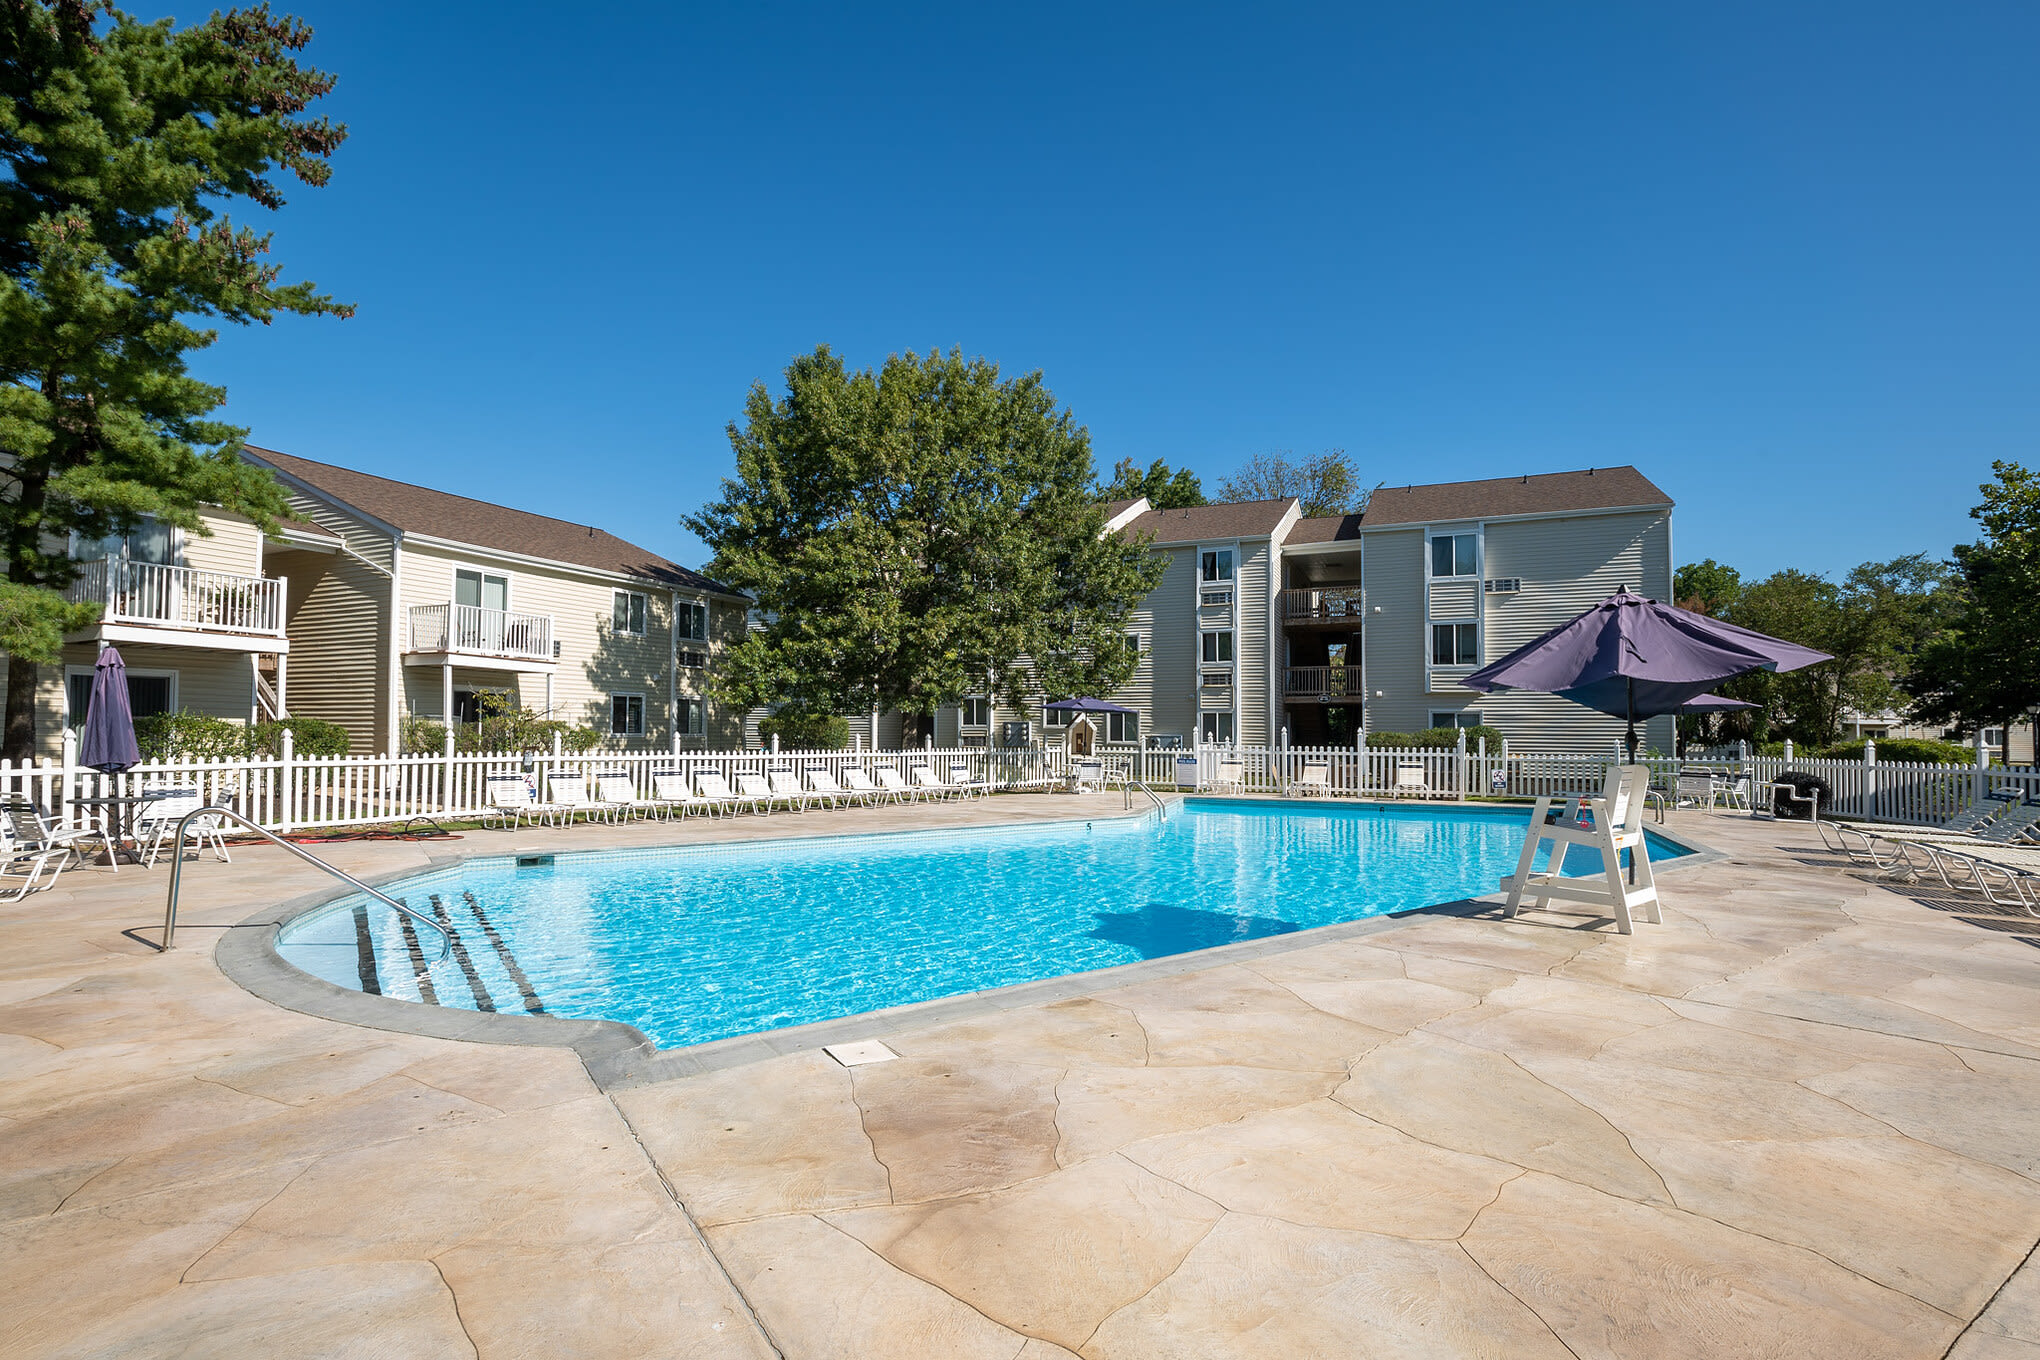 Swimming pool at The Village at Voorhees in Voorhees, New Jersey